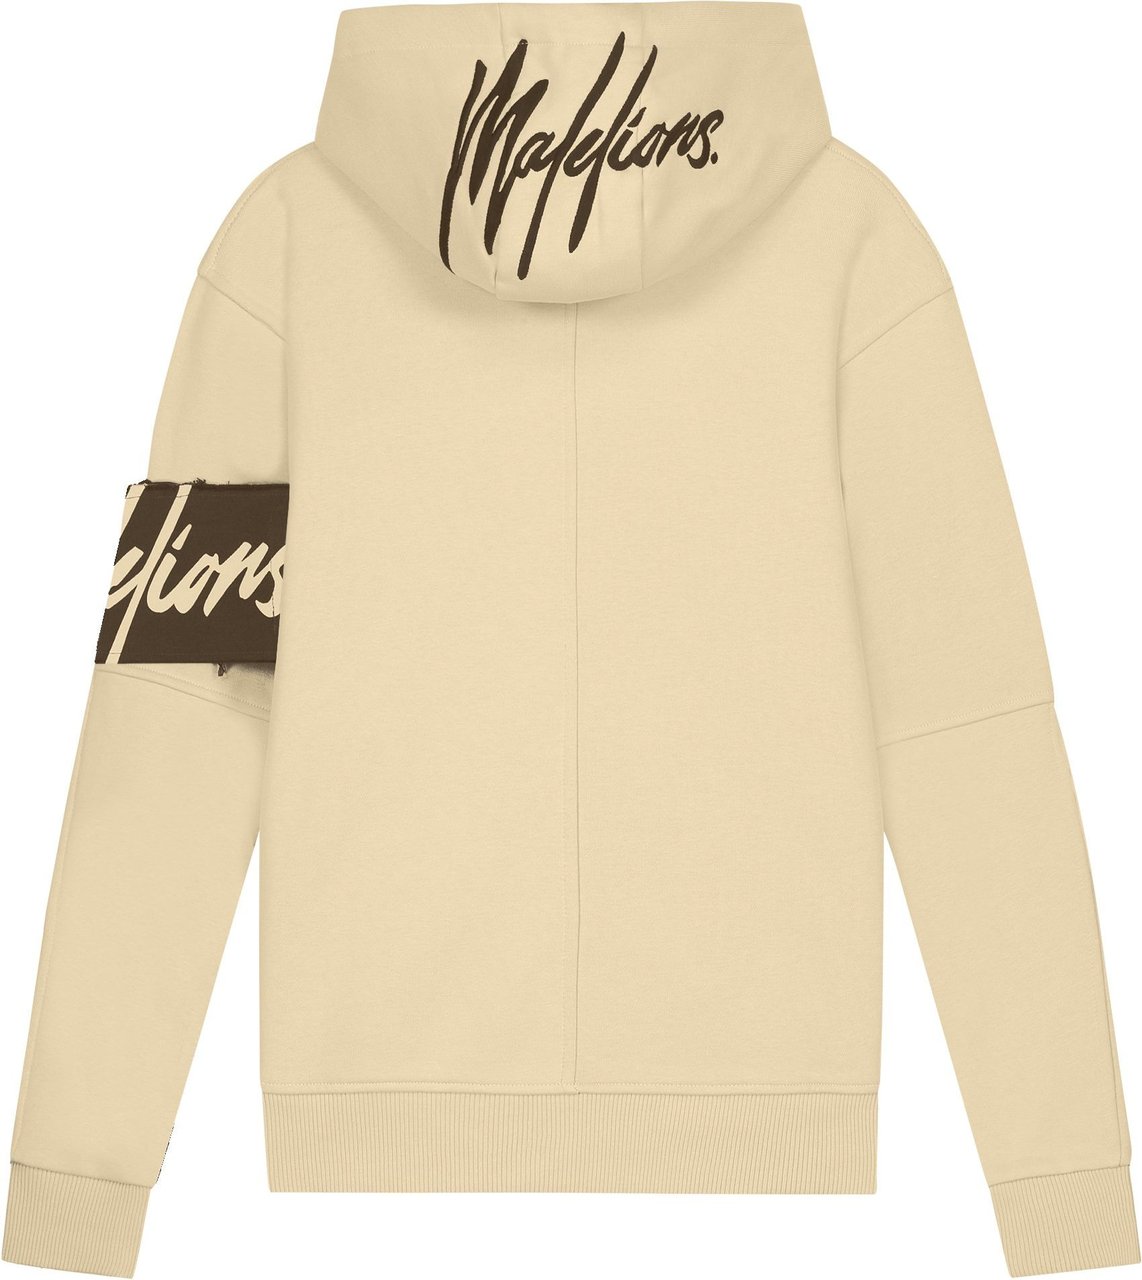 Malelions Captain Hoodie - Taupe/Brown Bruin